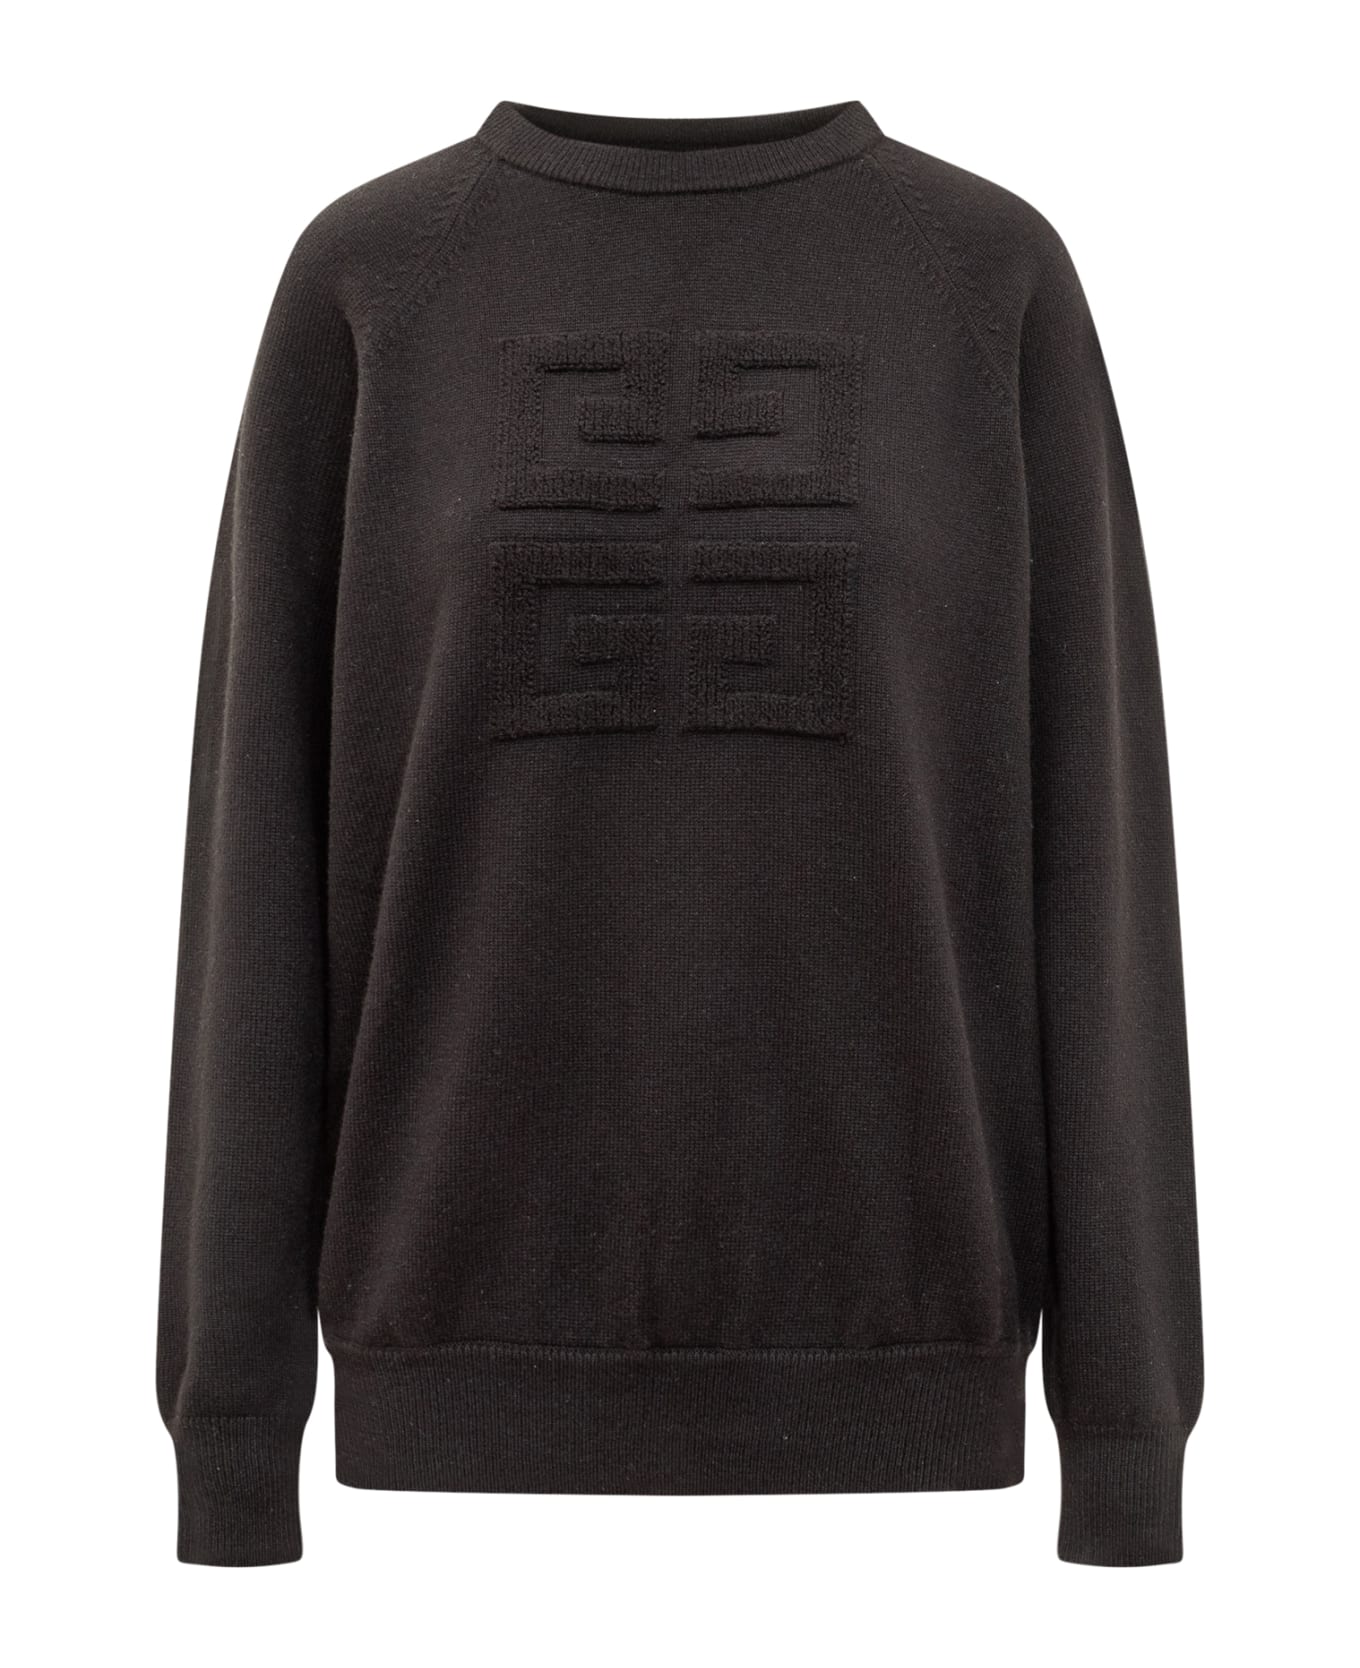 Givenchy 4g Sweater - Black フリース